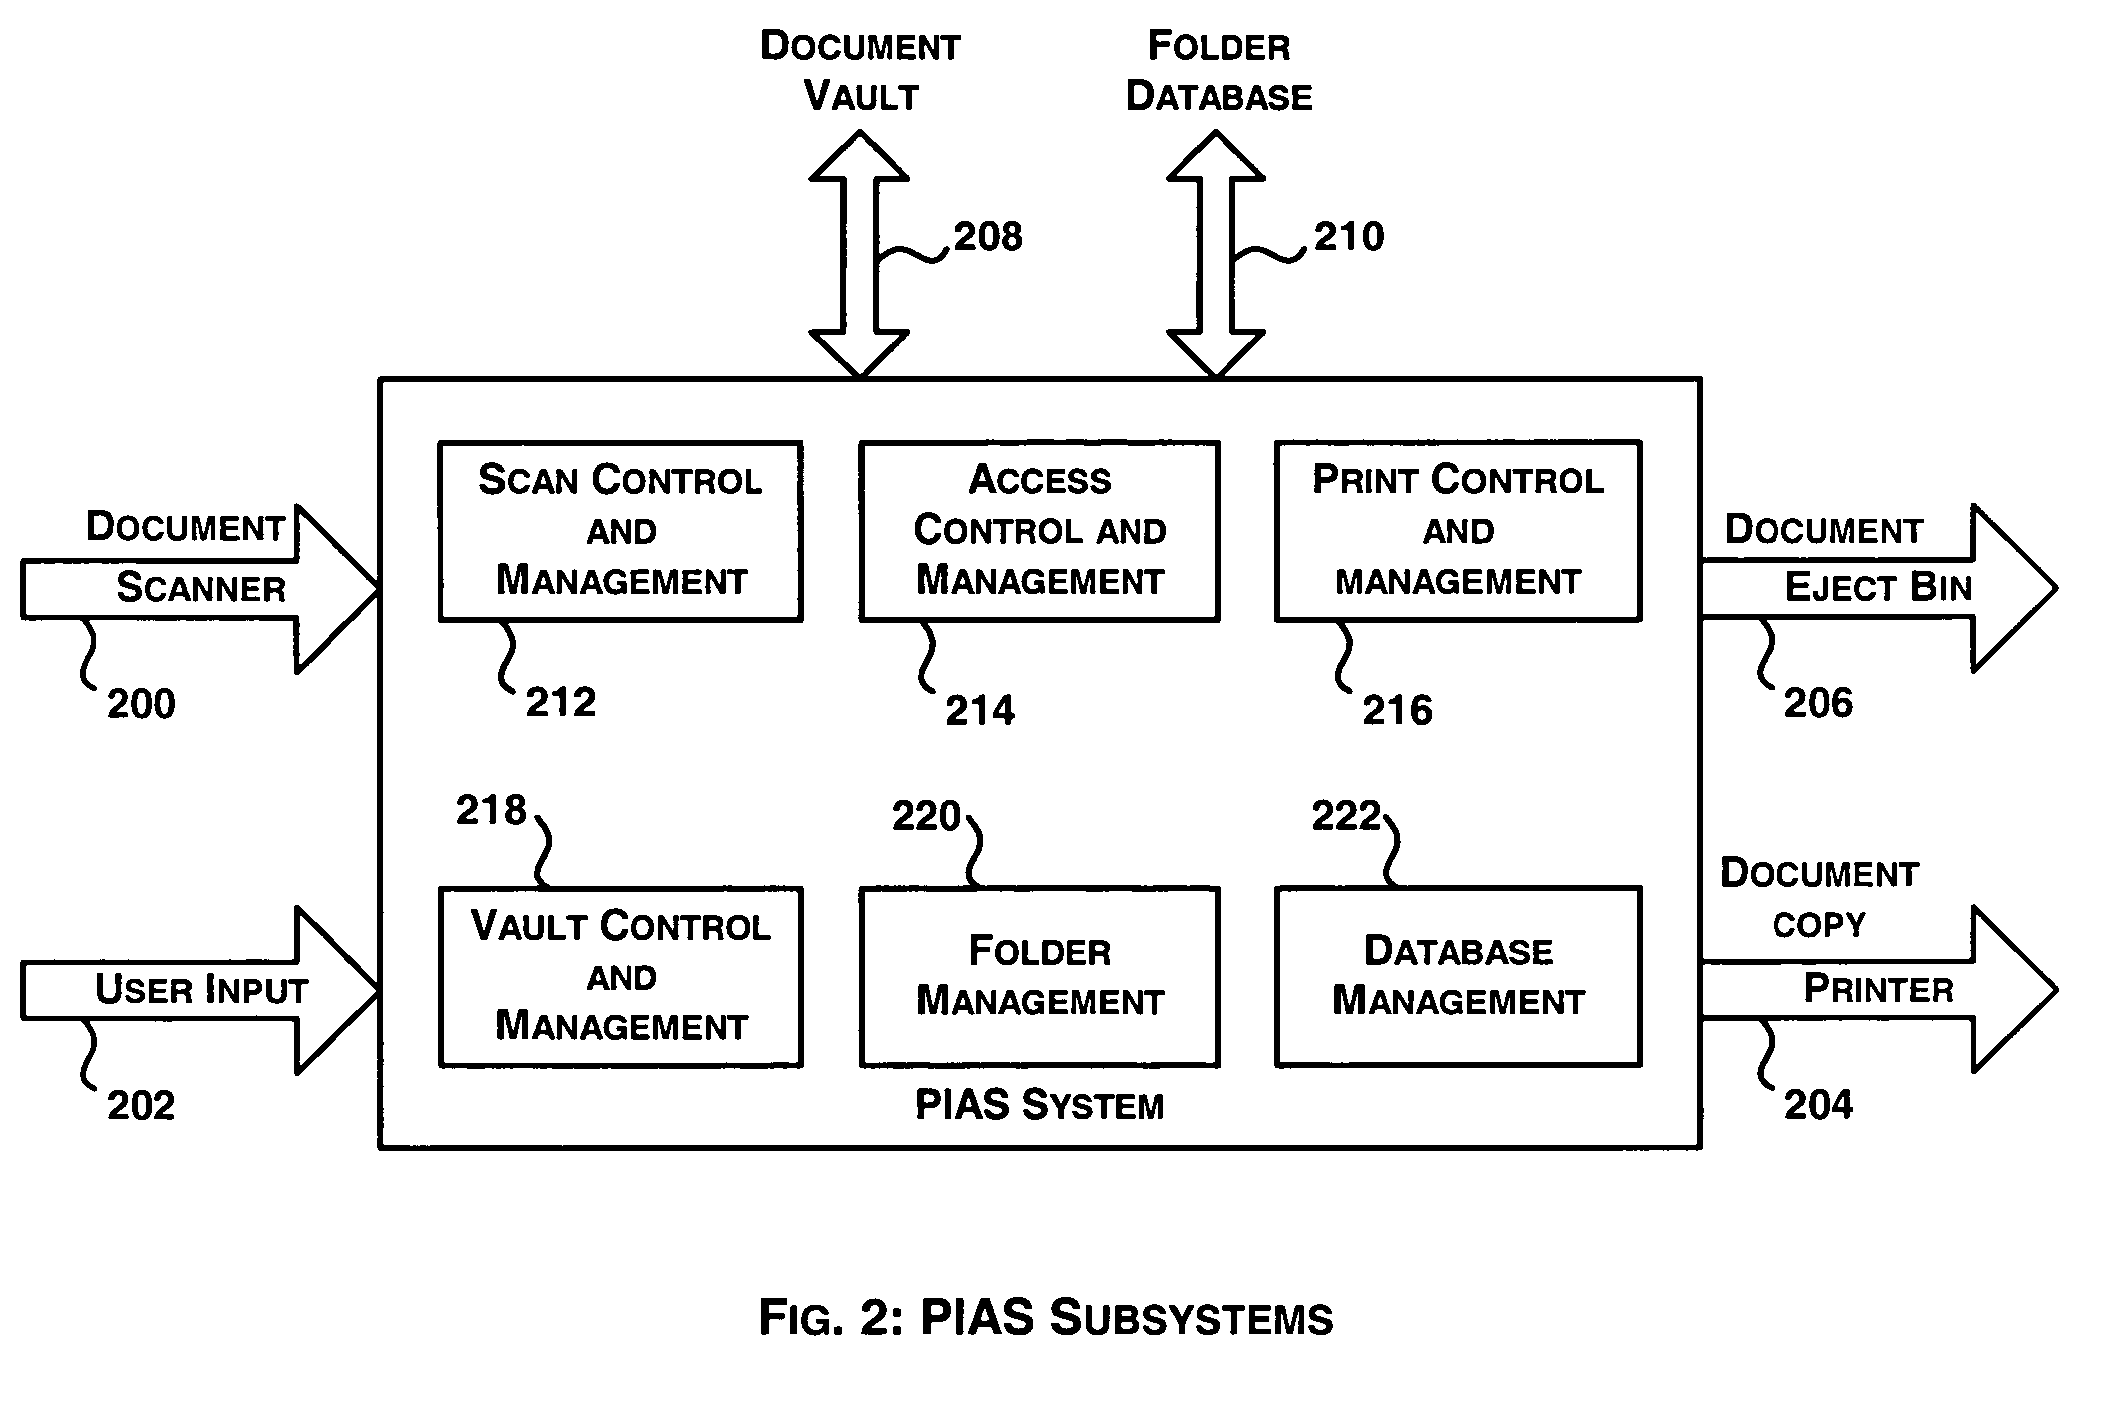 System and method for automatic indexing and archiving of paper documents